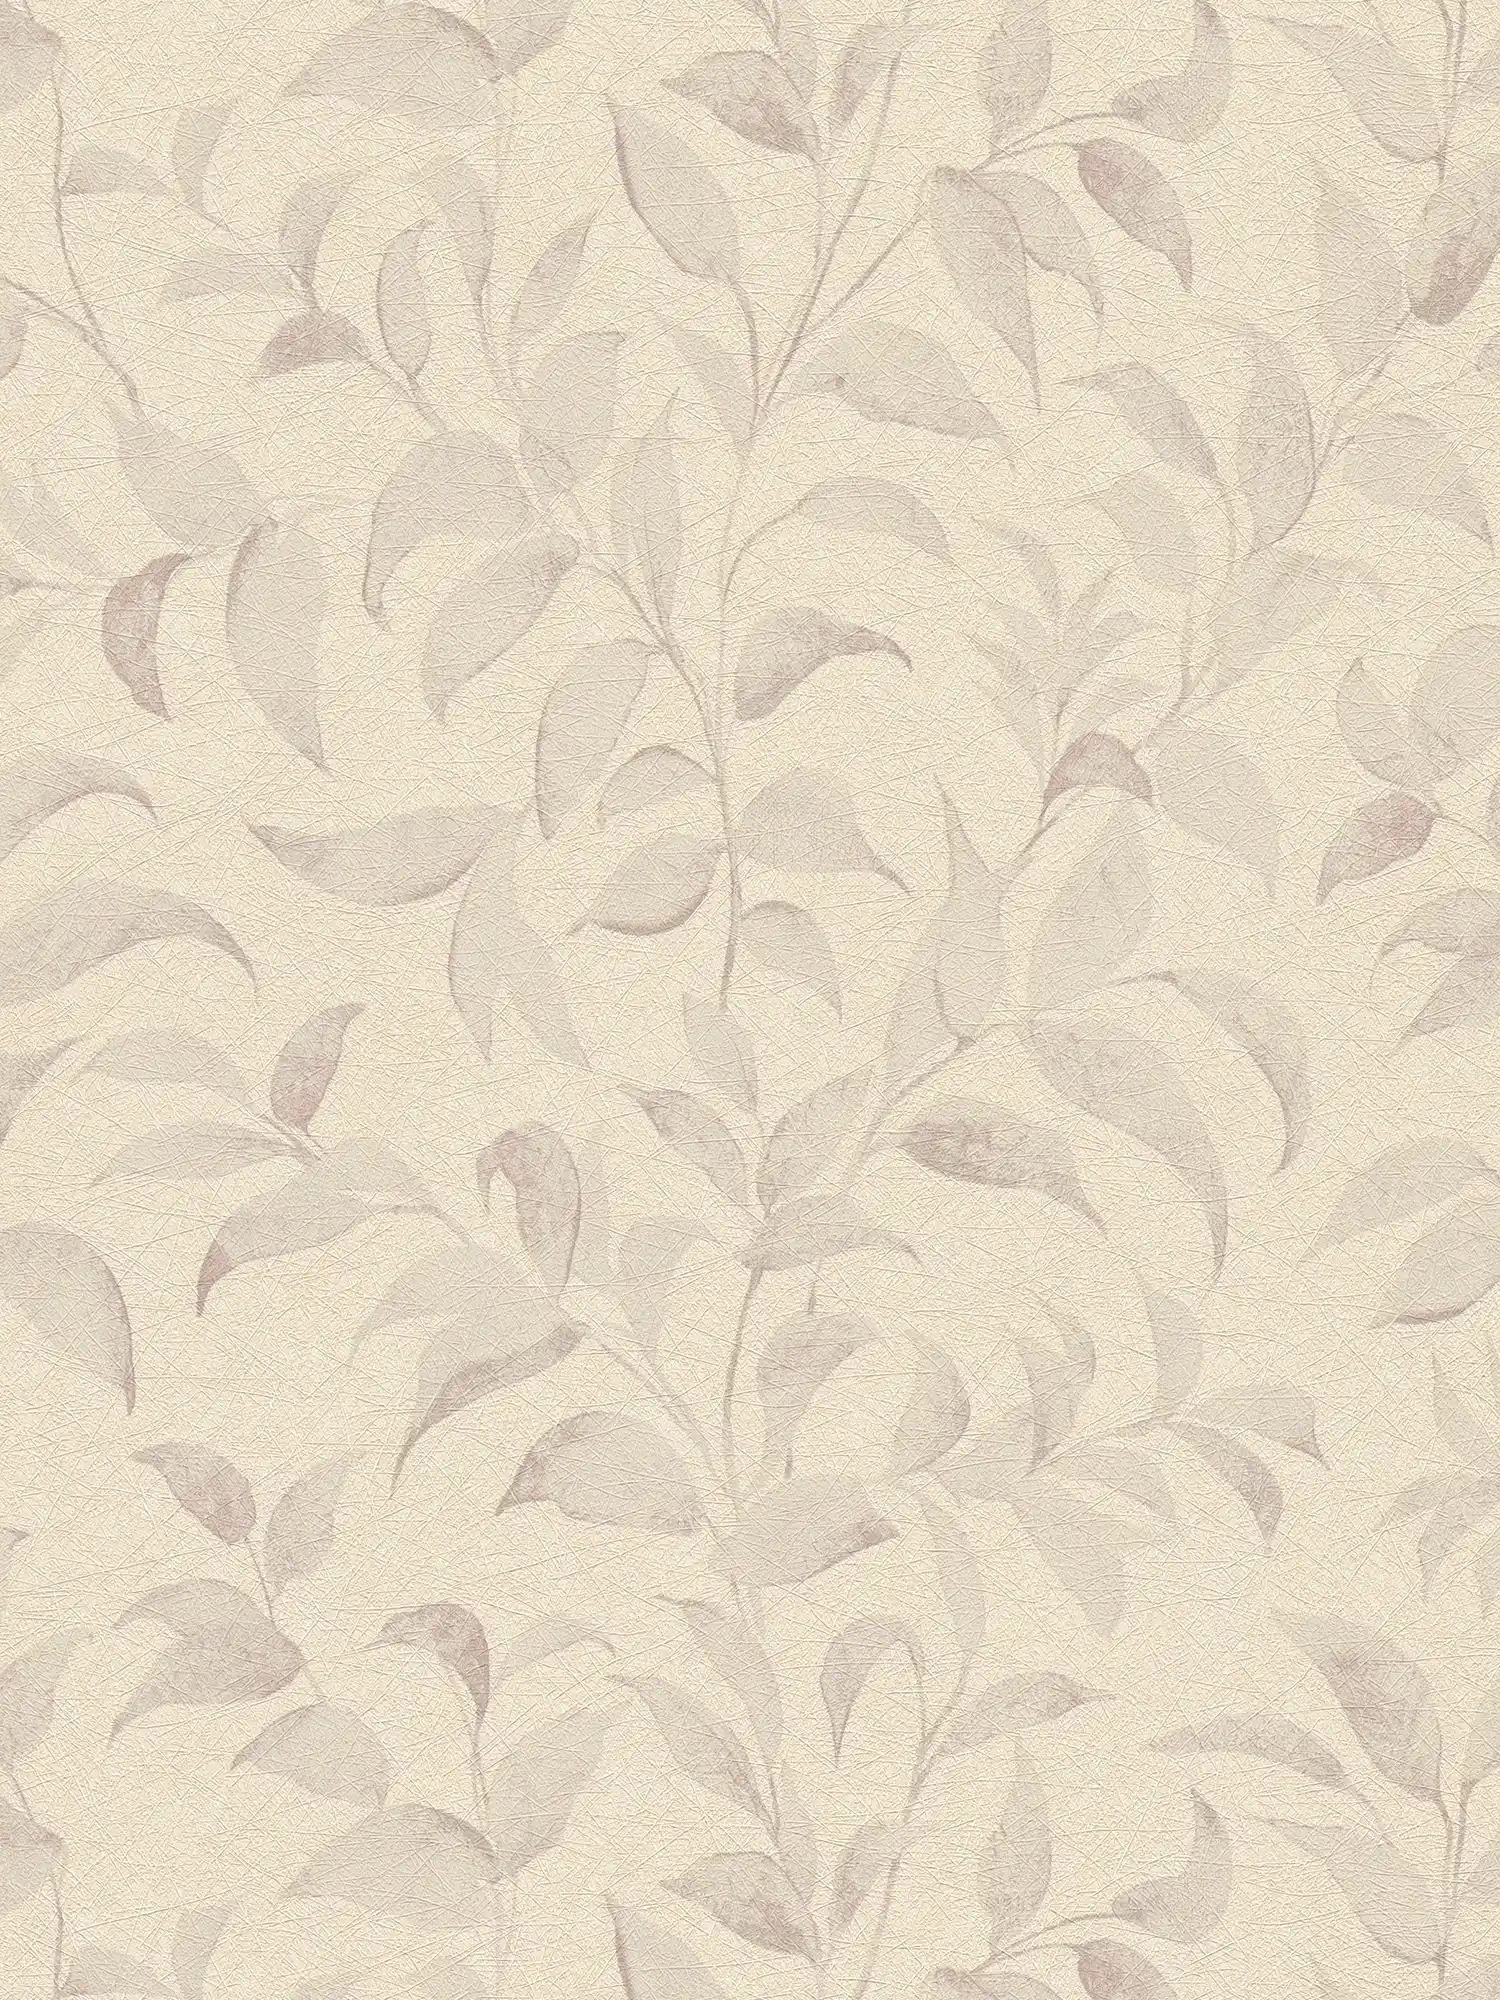 Floral wallpaper with leaves shimmering textured - grey, silver
